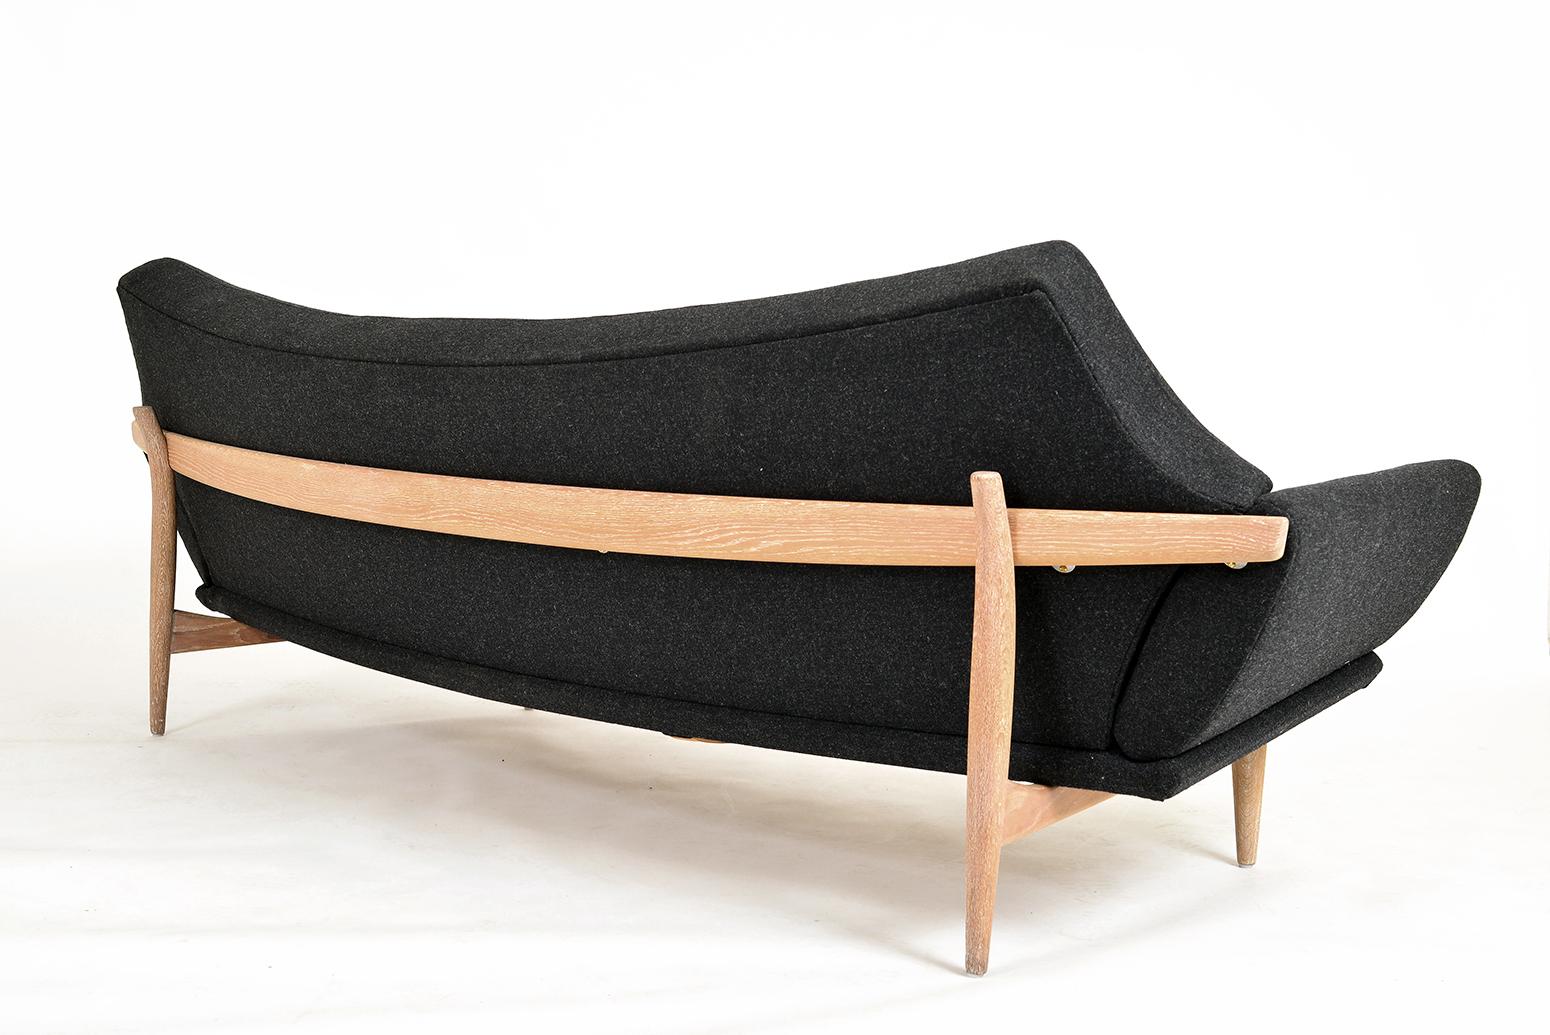 1960s Swedish Curved Sofa & Chair Johannes Andersen Trensums Mid-Century Modern For Sale 2